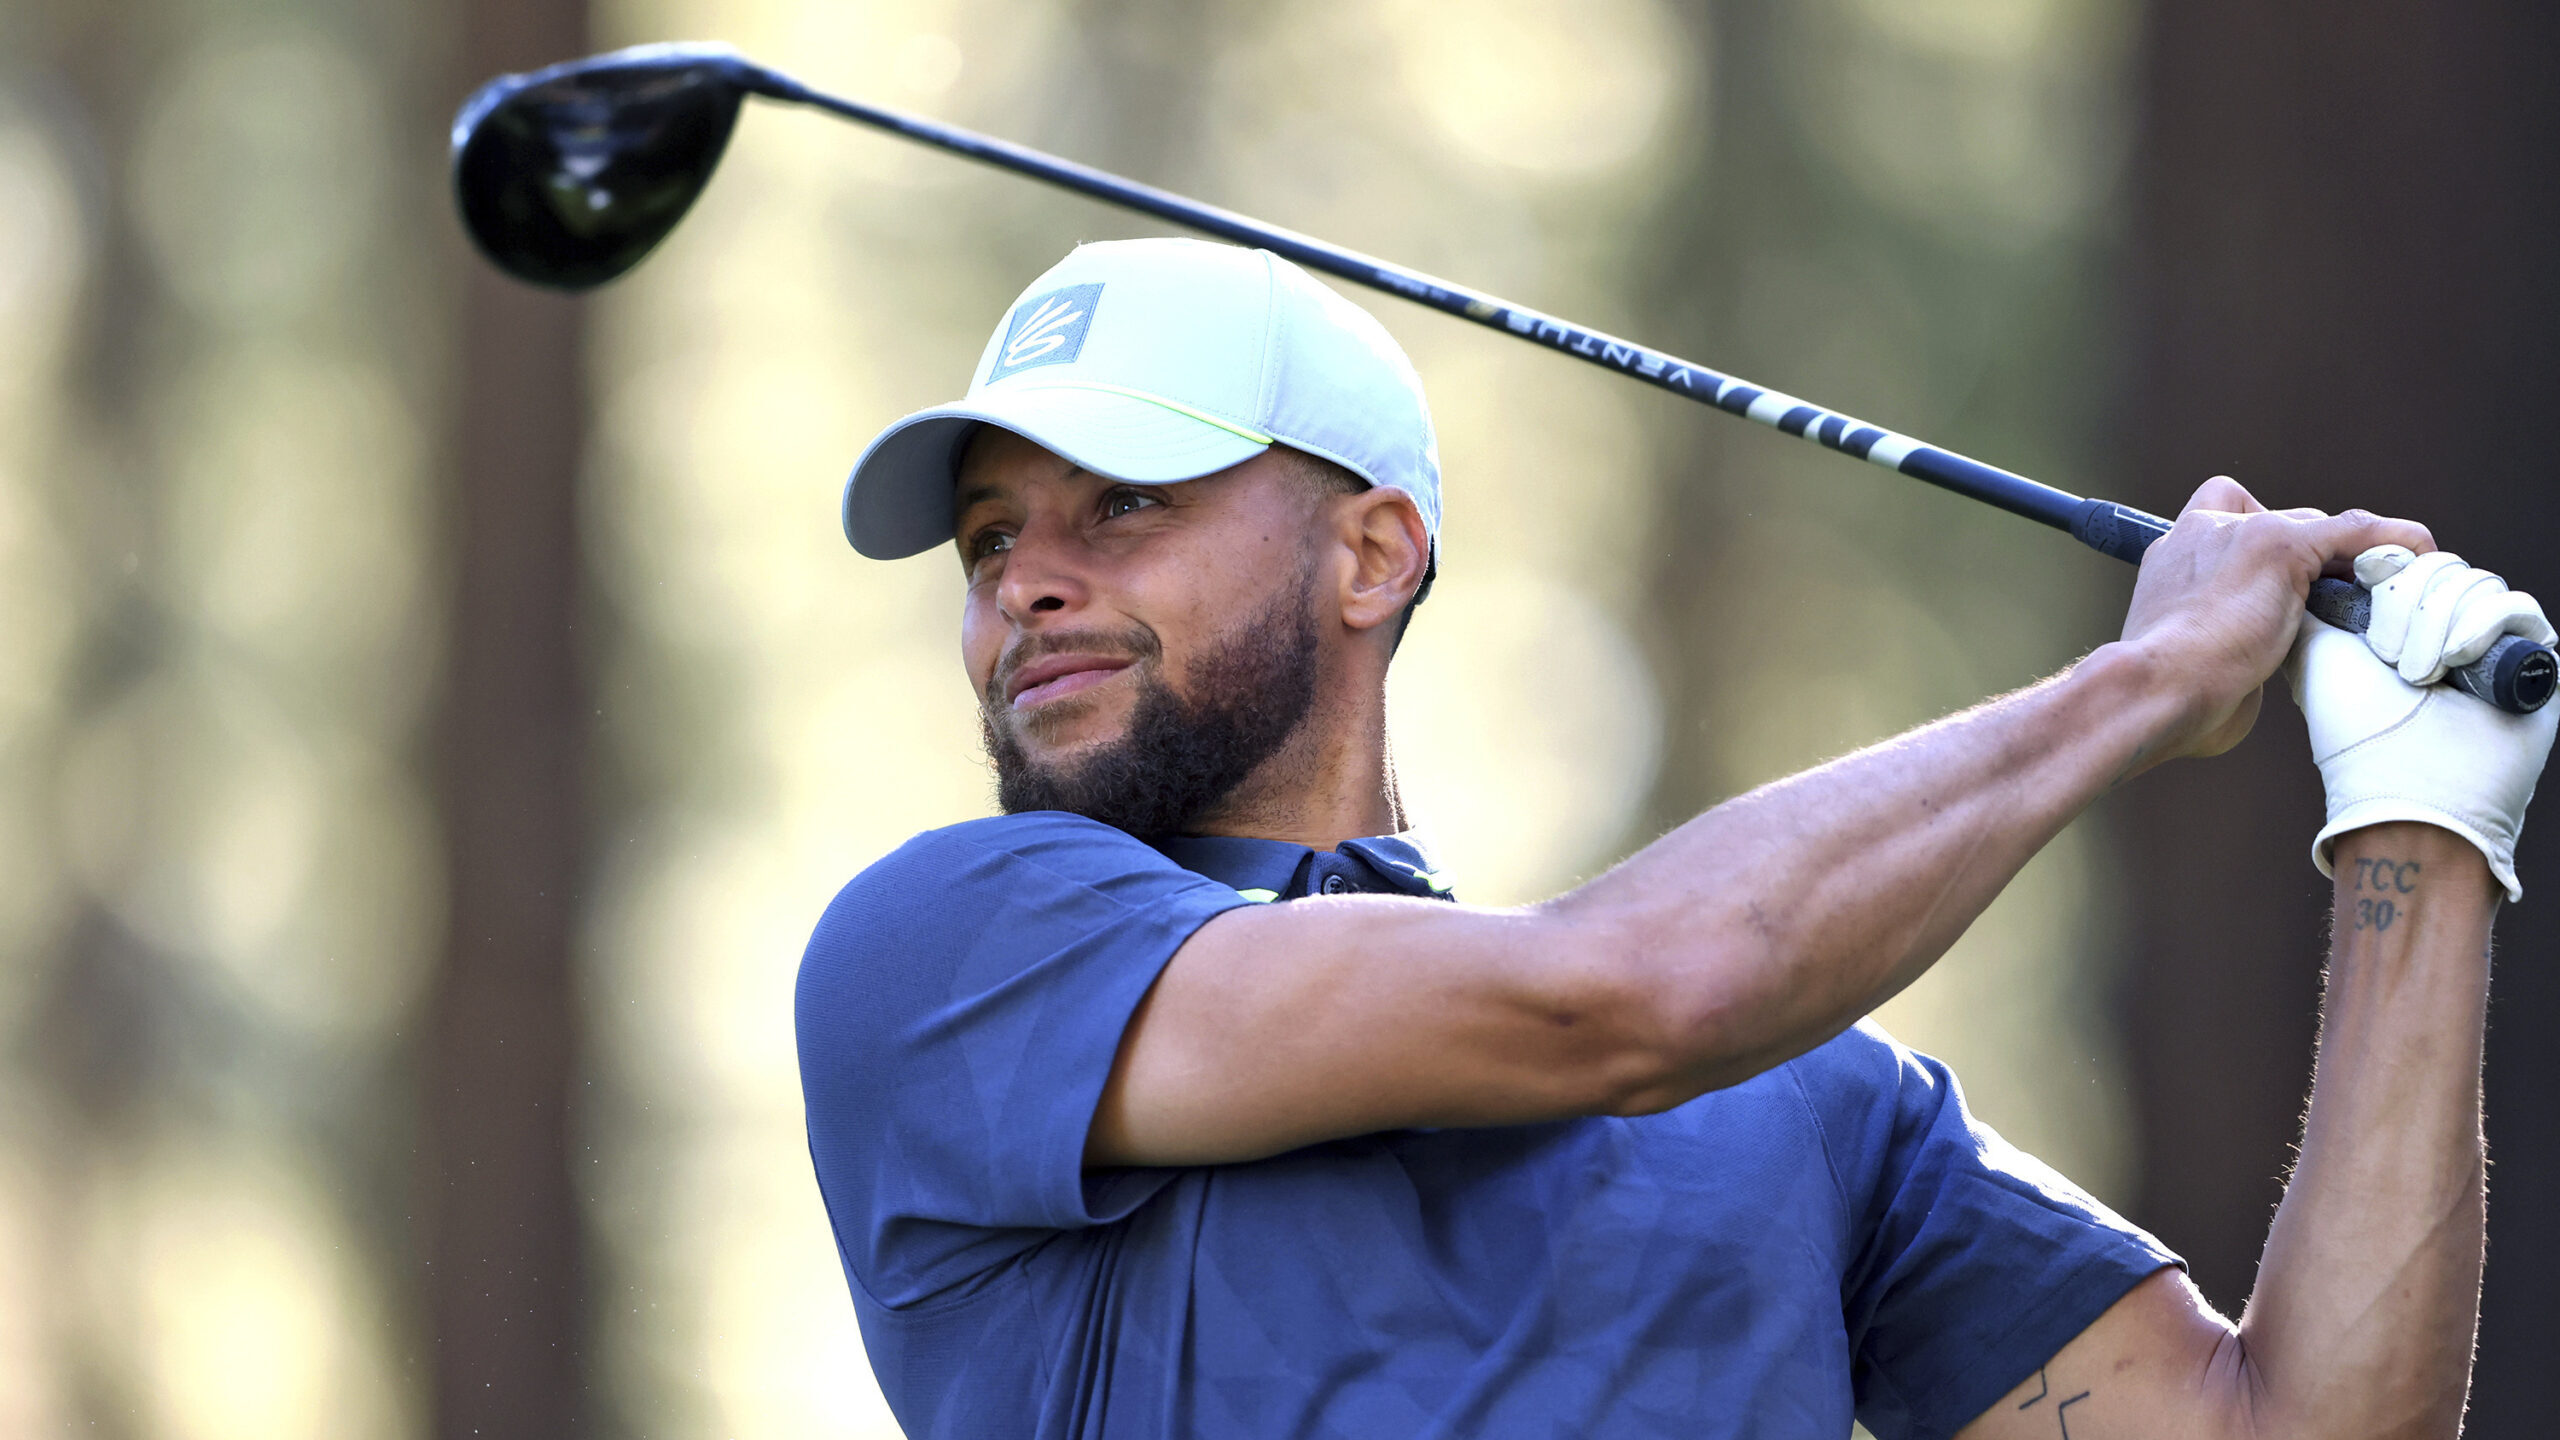 Stephen Curry watches a tee shot on the 16th hole during a practice round at American Century Champ...